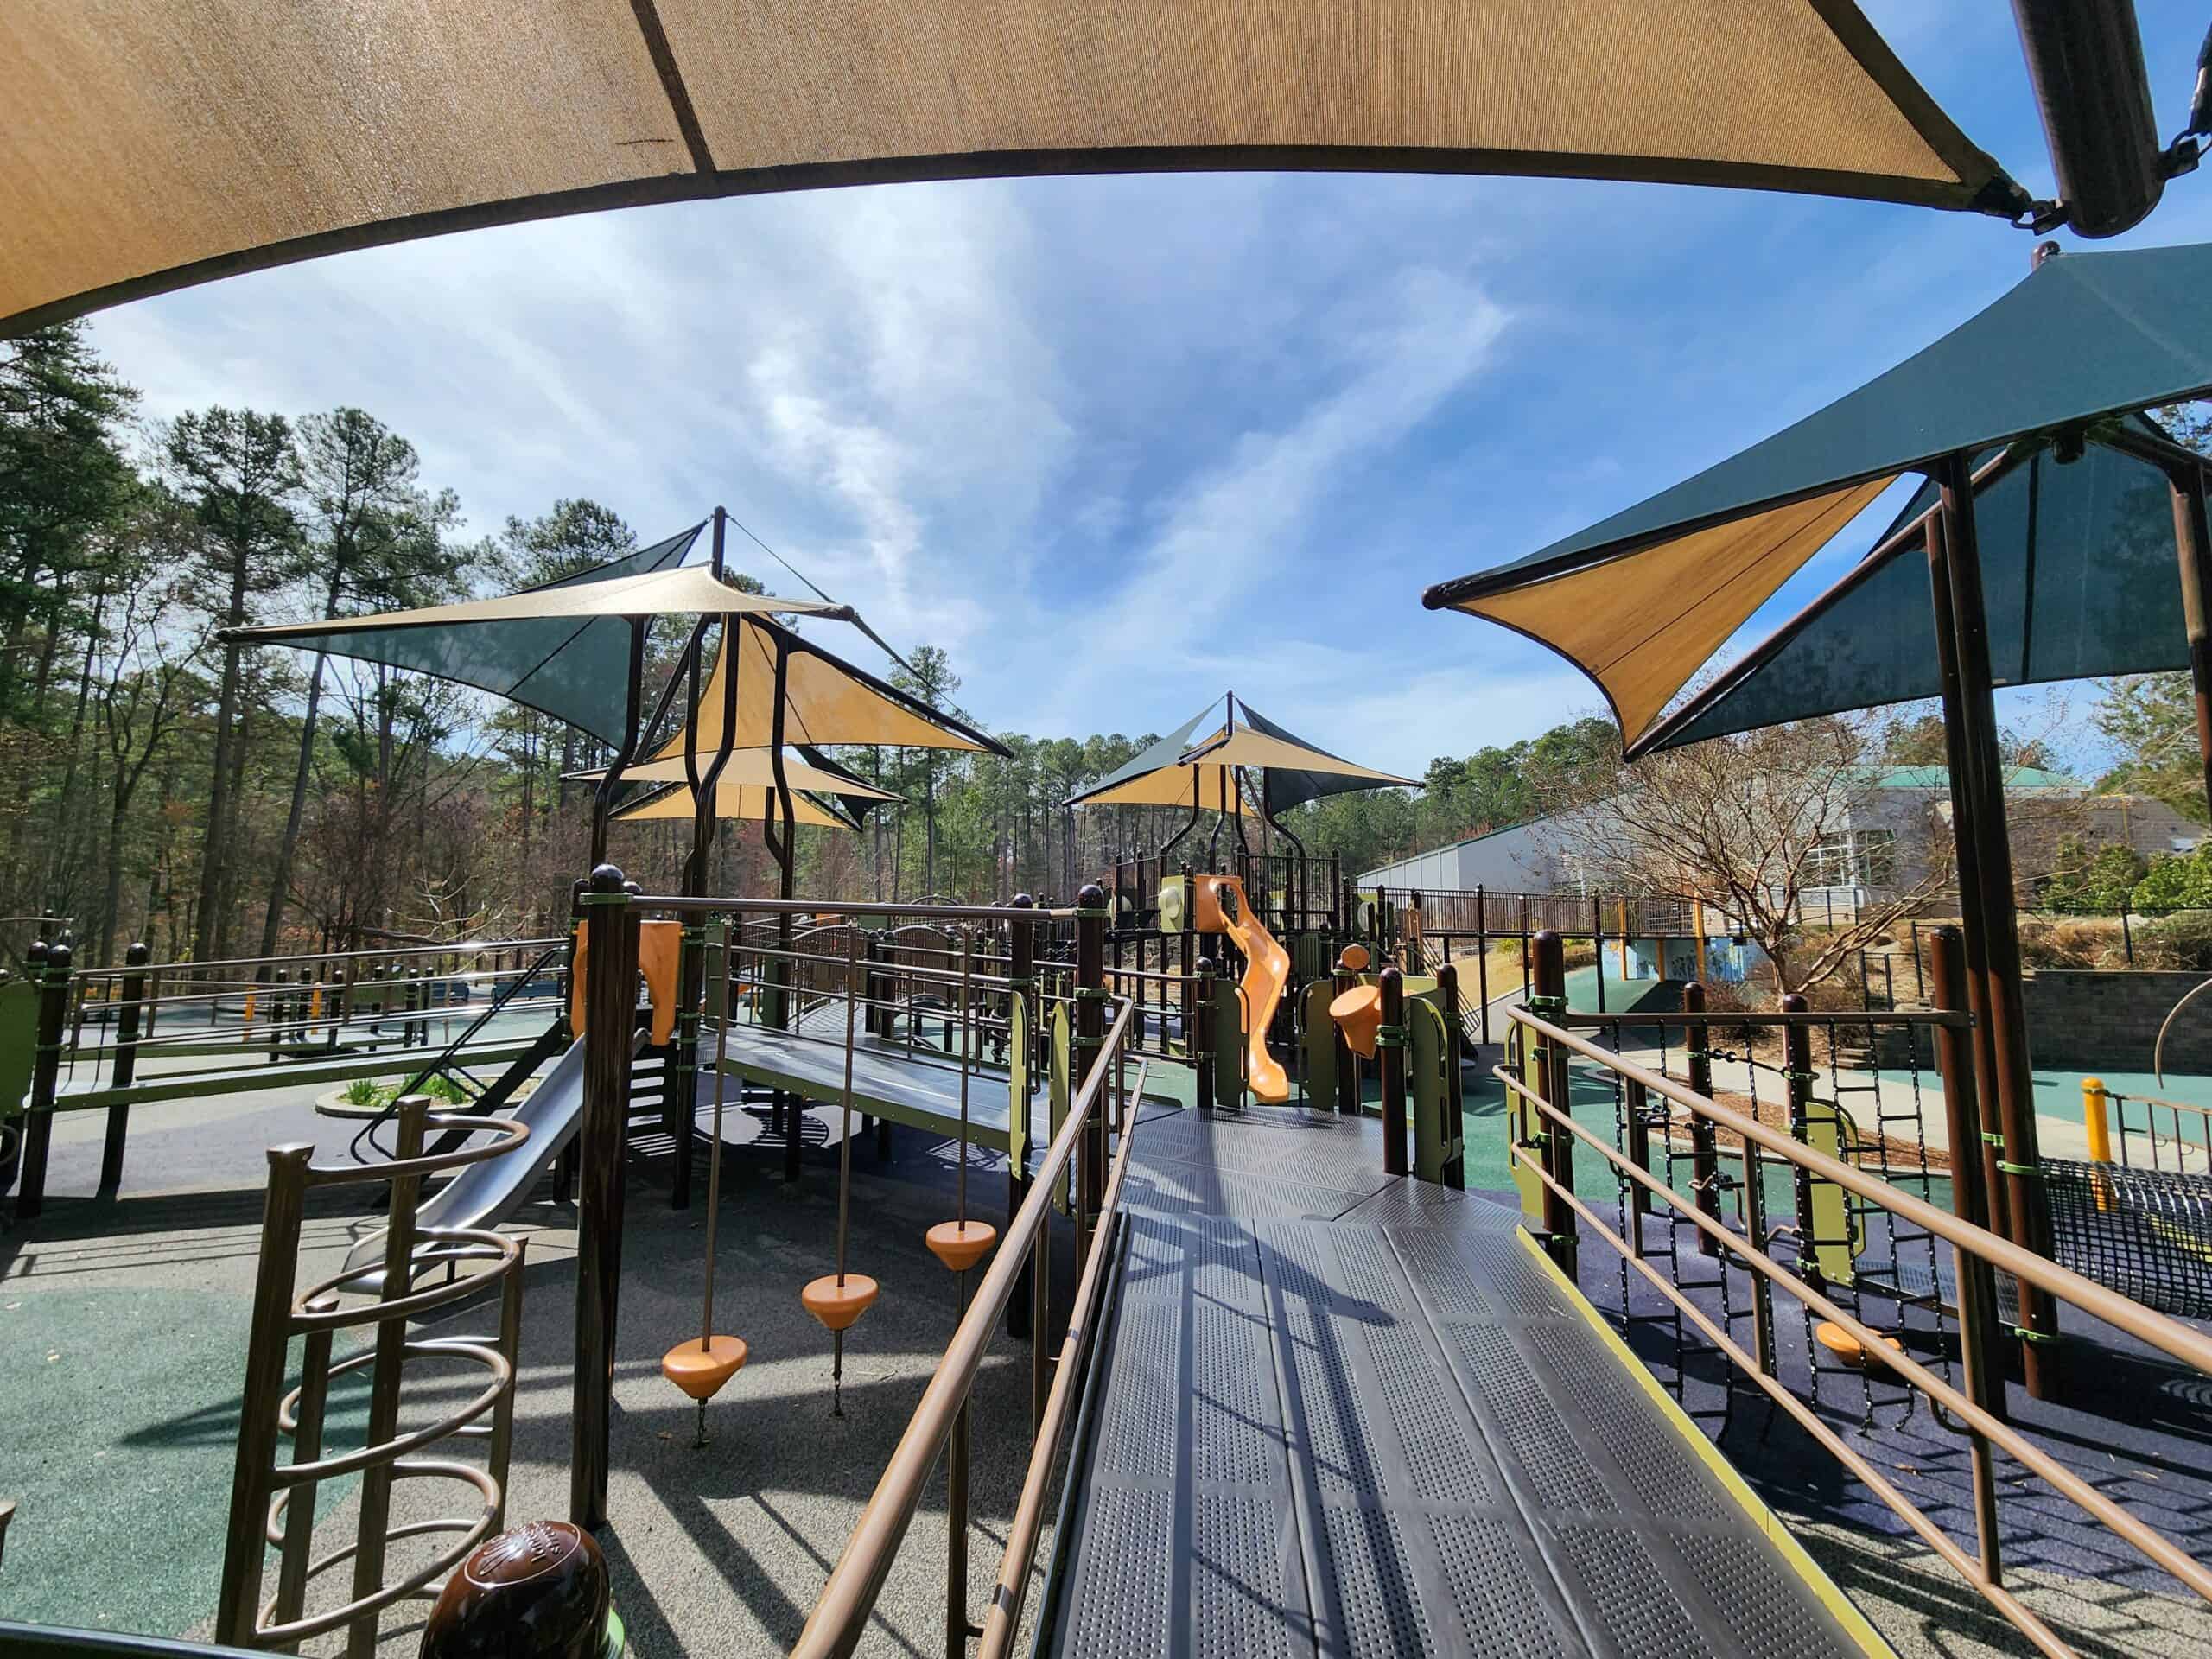 A modern playground bathed in sunlight with protective canopies casting cool shade over various climbing and play structures, set amidst a tranquil forest setting.